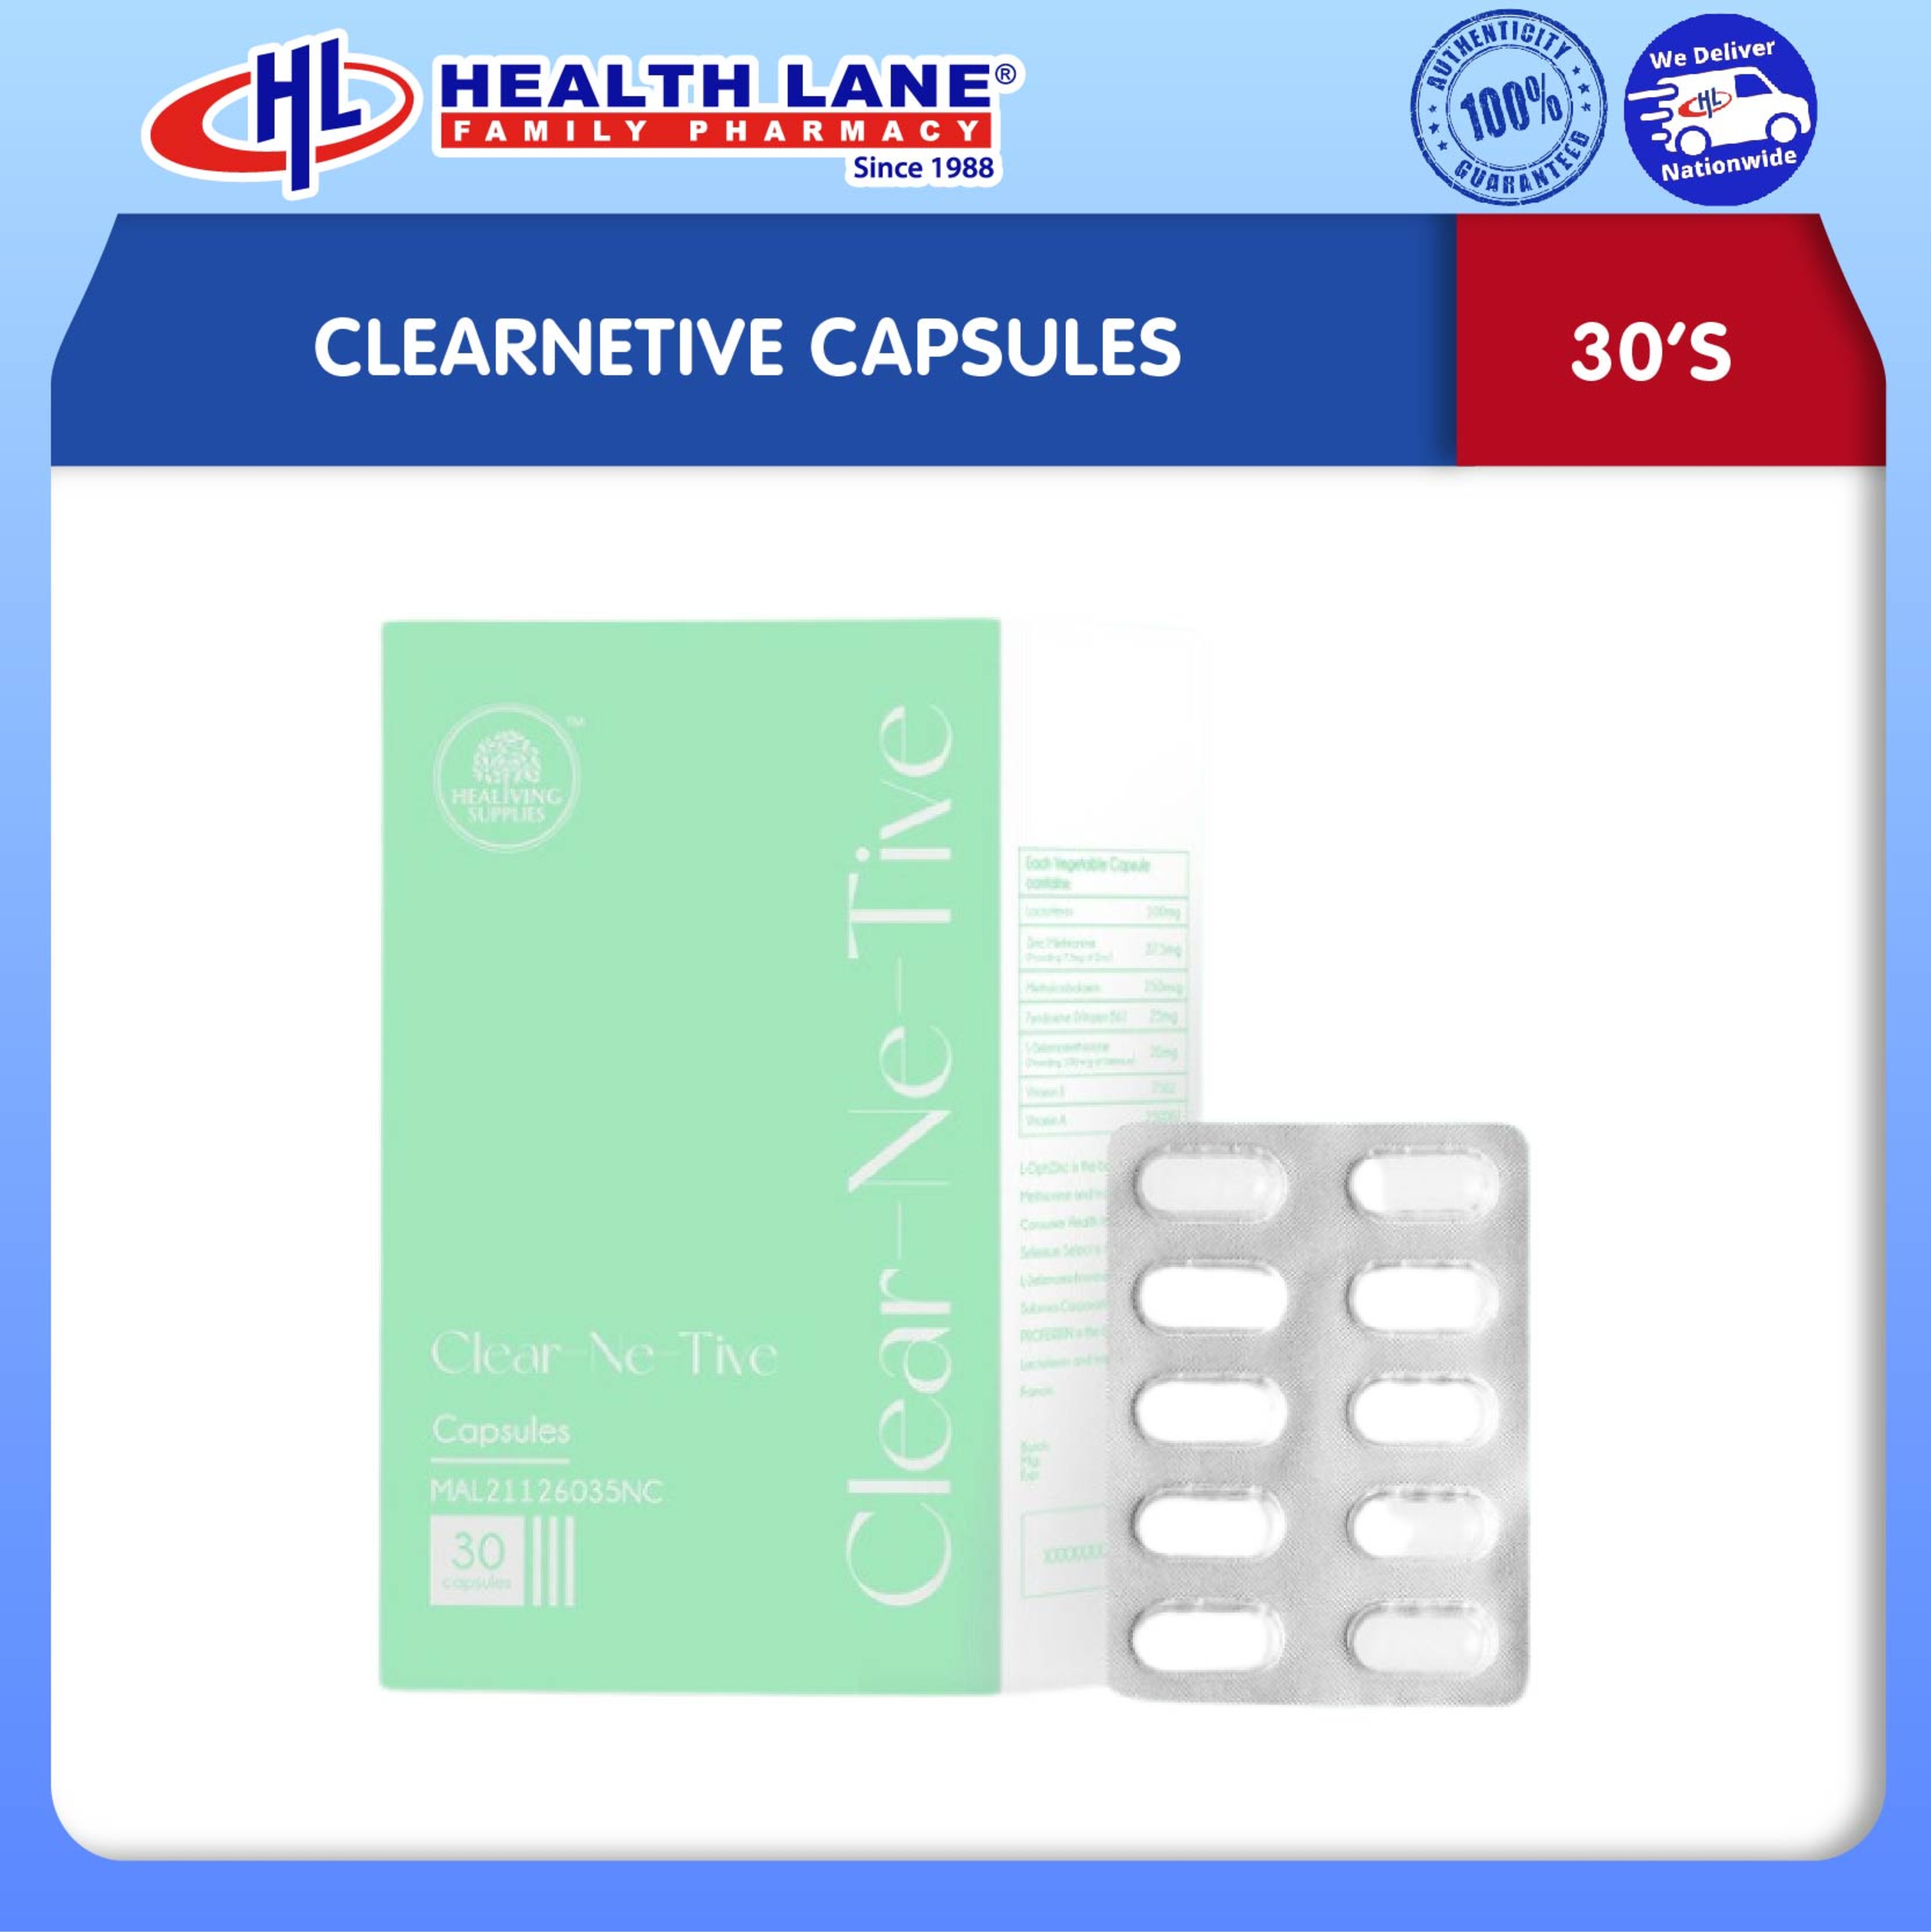 CLEARNETIVE CAPSULES (30'S)